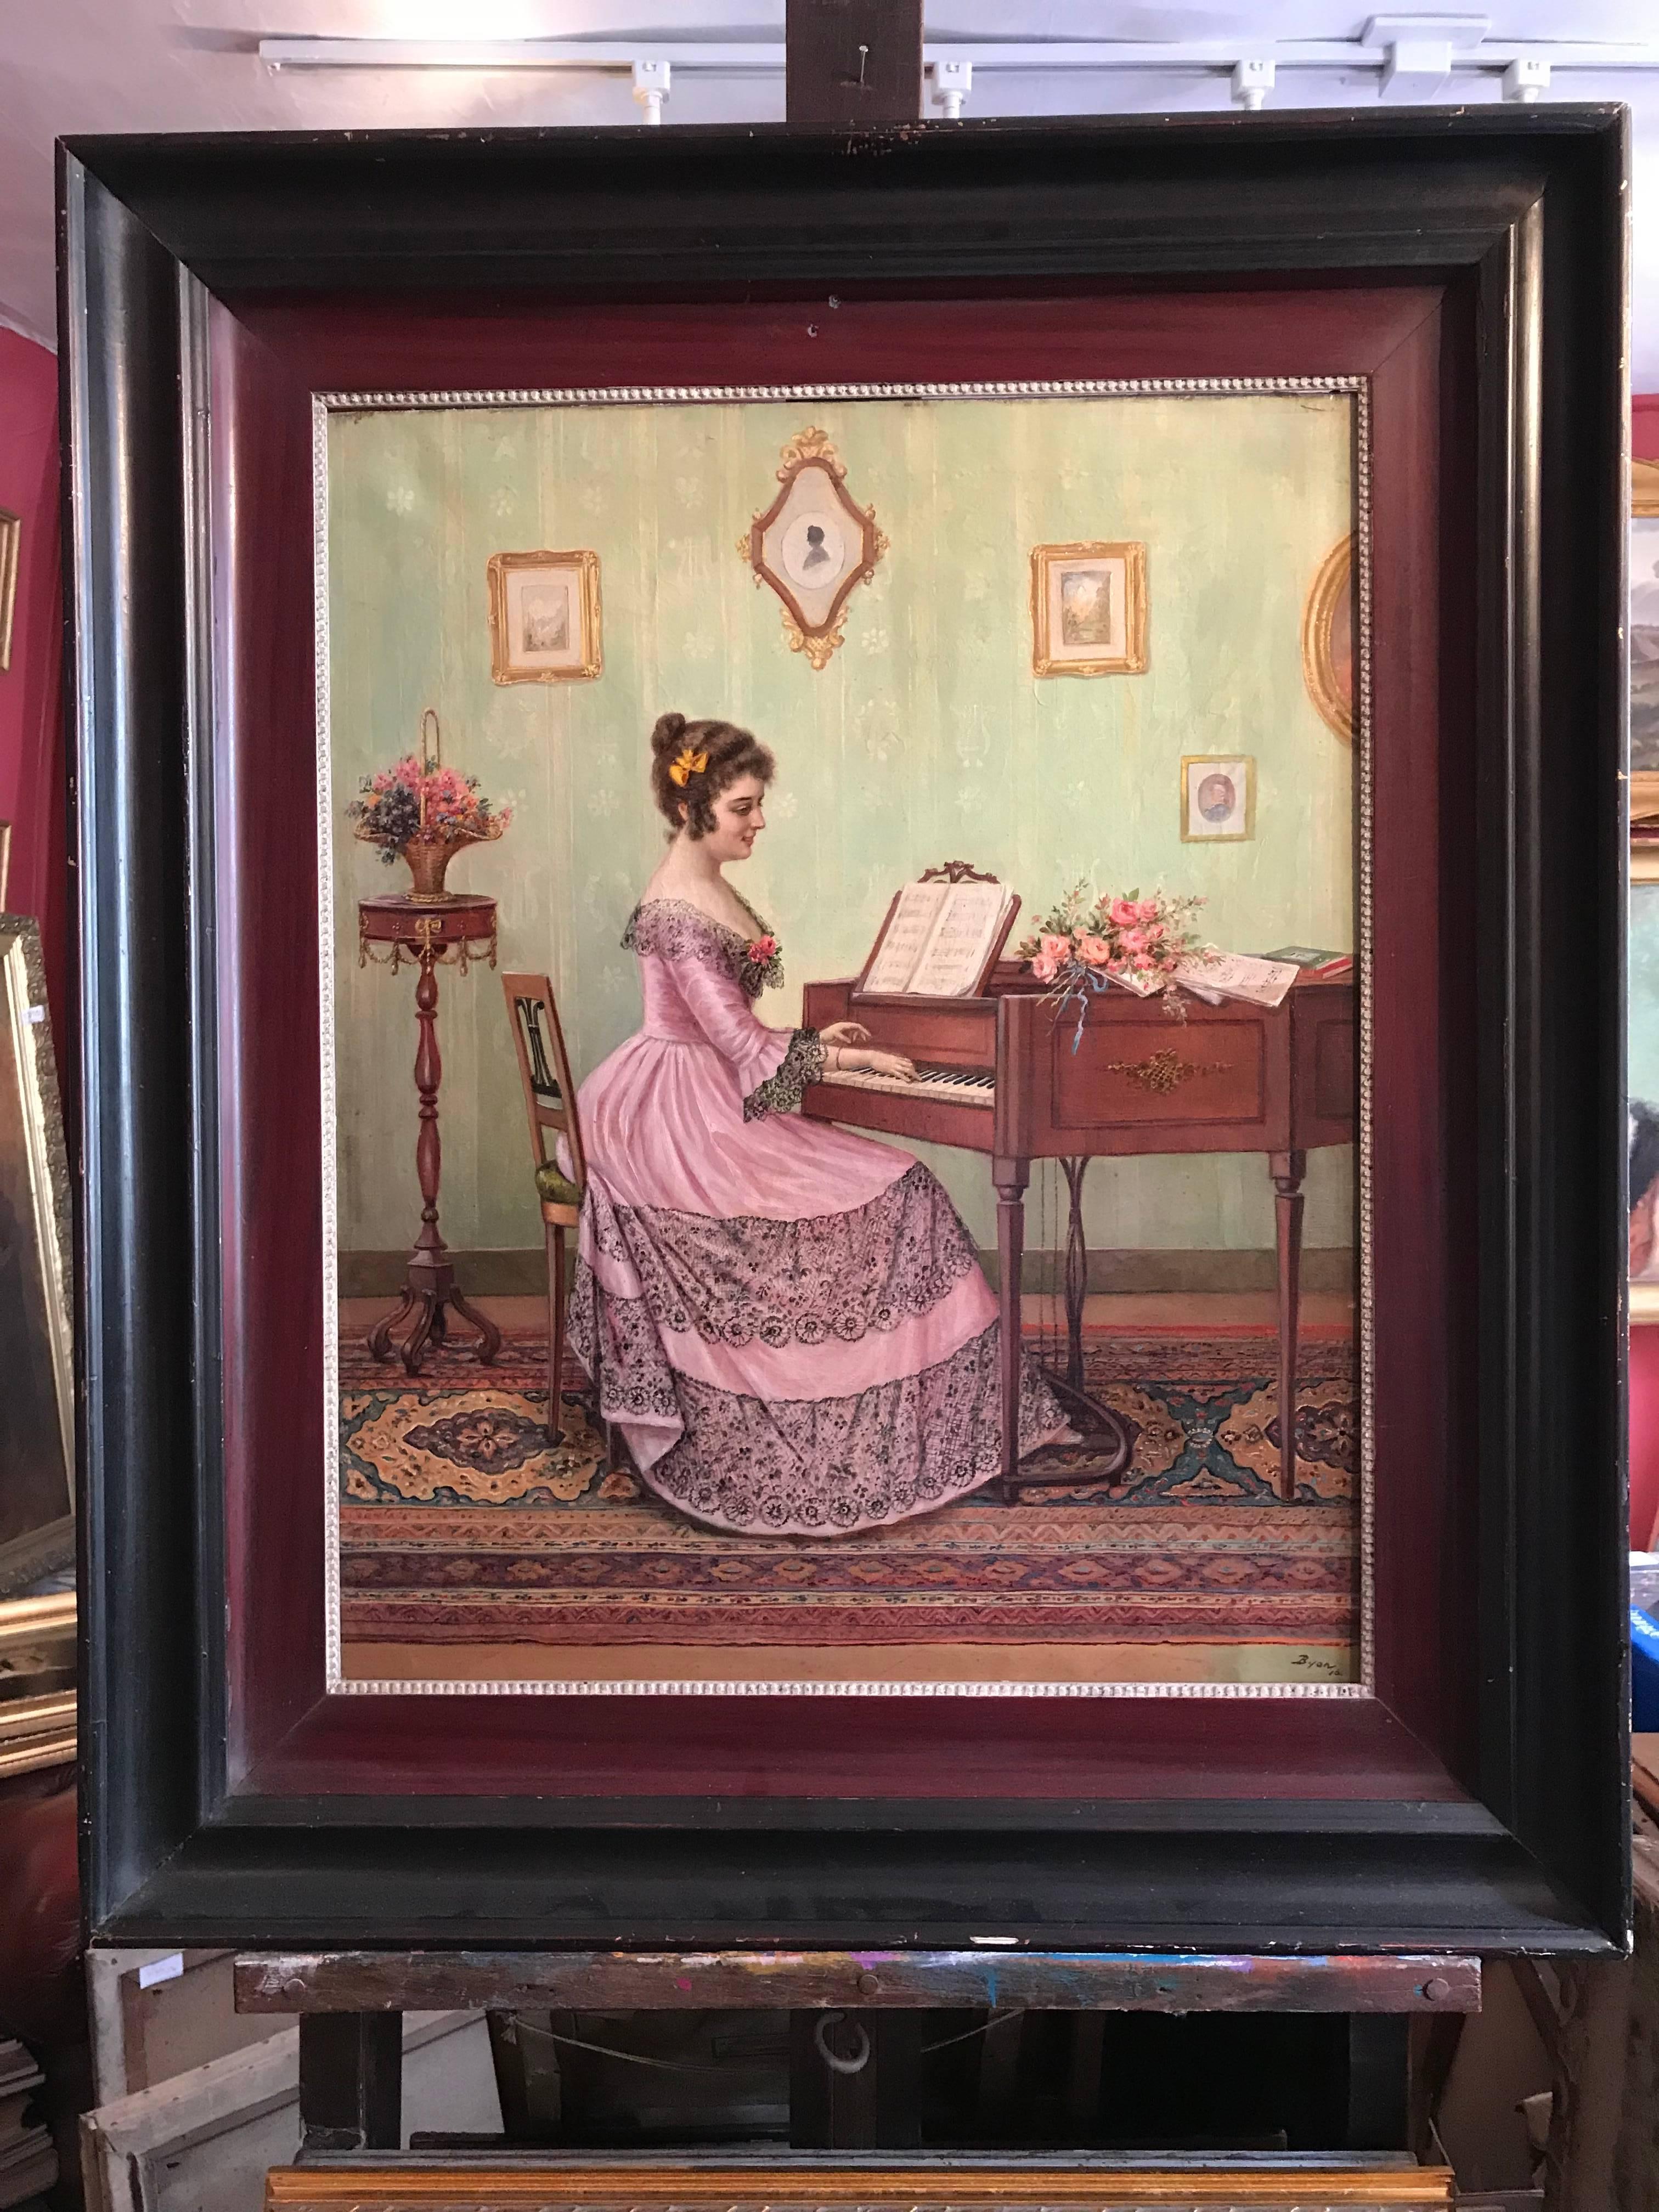 Elegant Lady in Parlour Playing Piano, French signed & dated 1916, Fine oi - Painting by French Belle Epoque